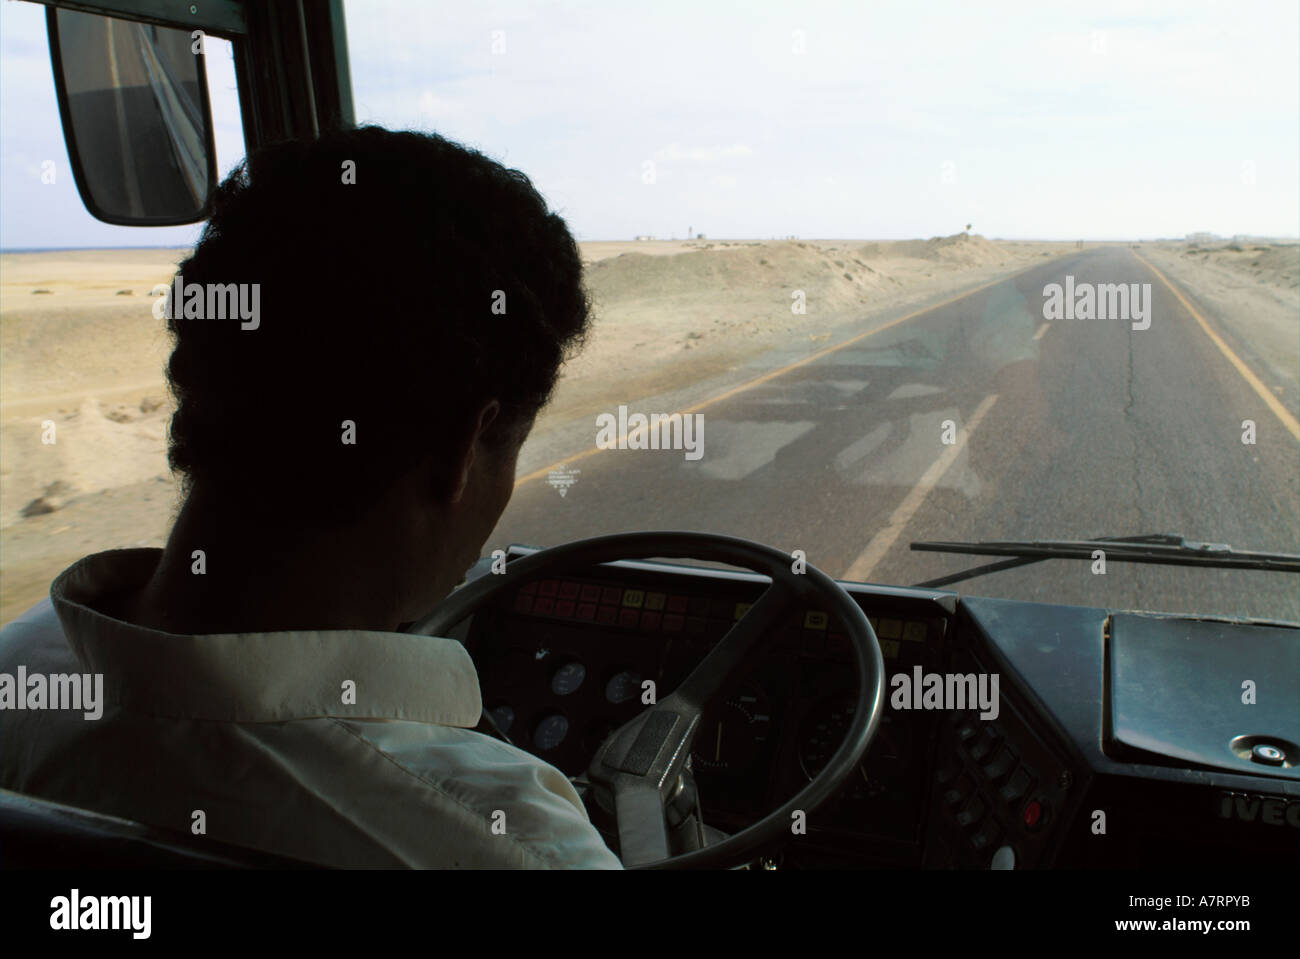 Egypt between quoseir and marsa alam man driving a bus on a highway Stock Photo